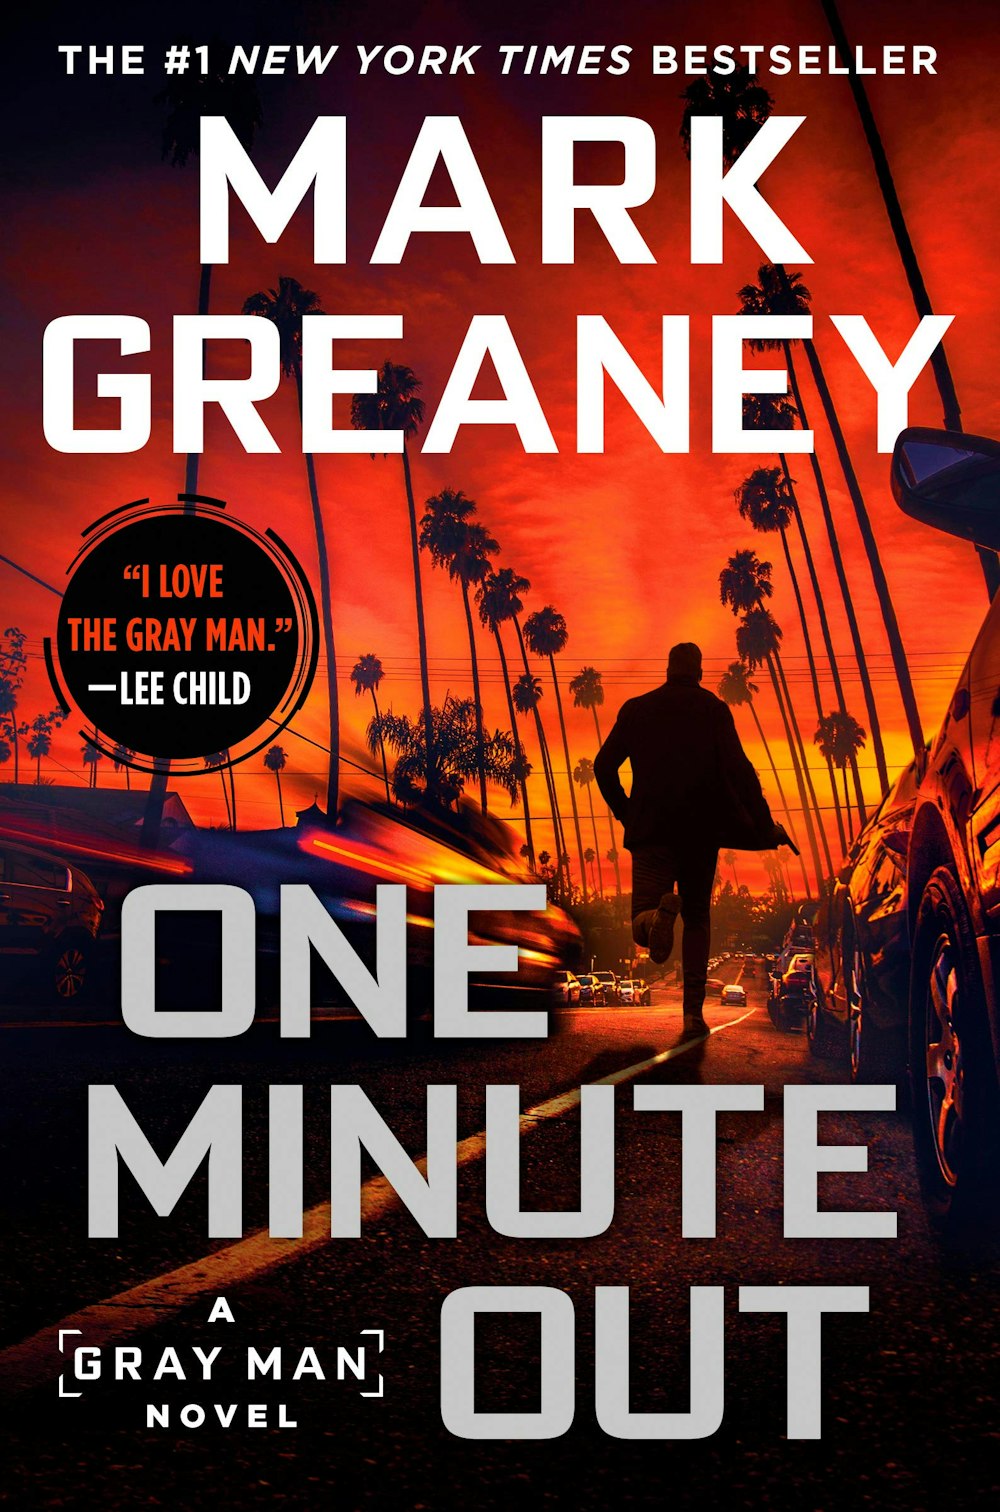 One Minute Out (A Gray Man Novel) Written by Mark Greaney, Reviewed by Shannon Wise